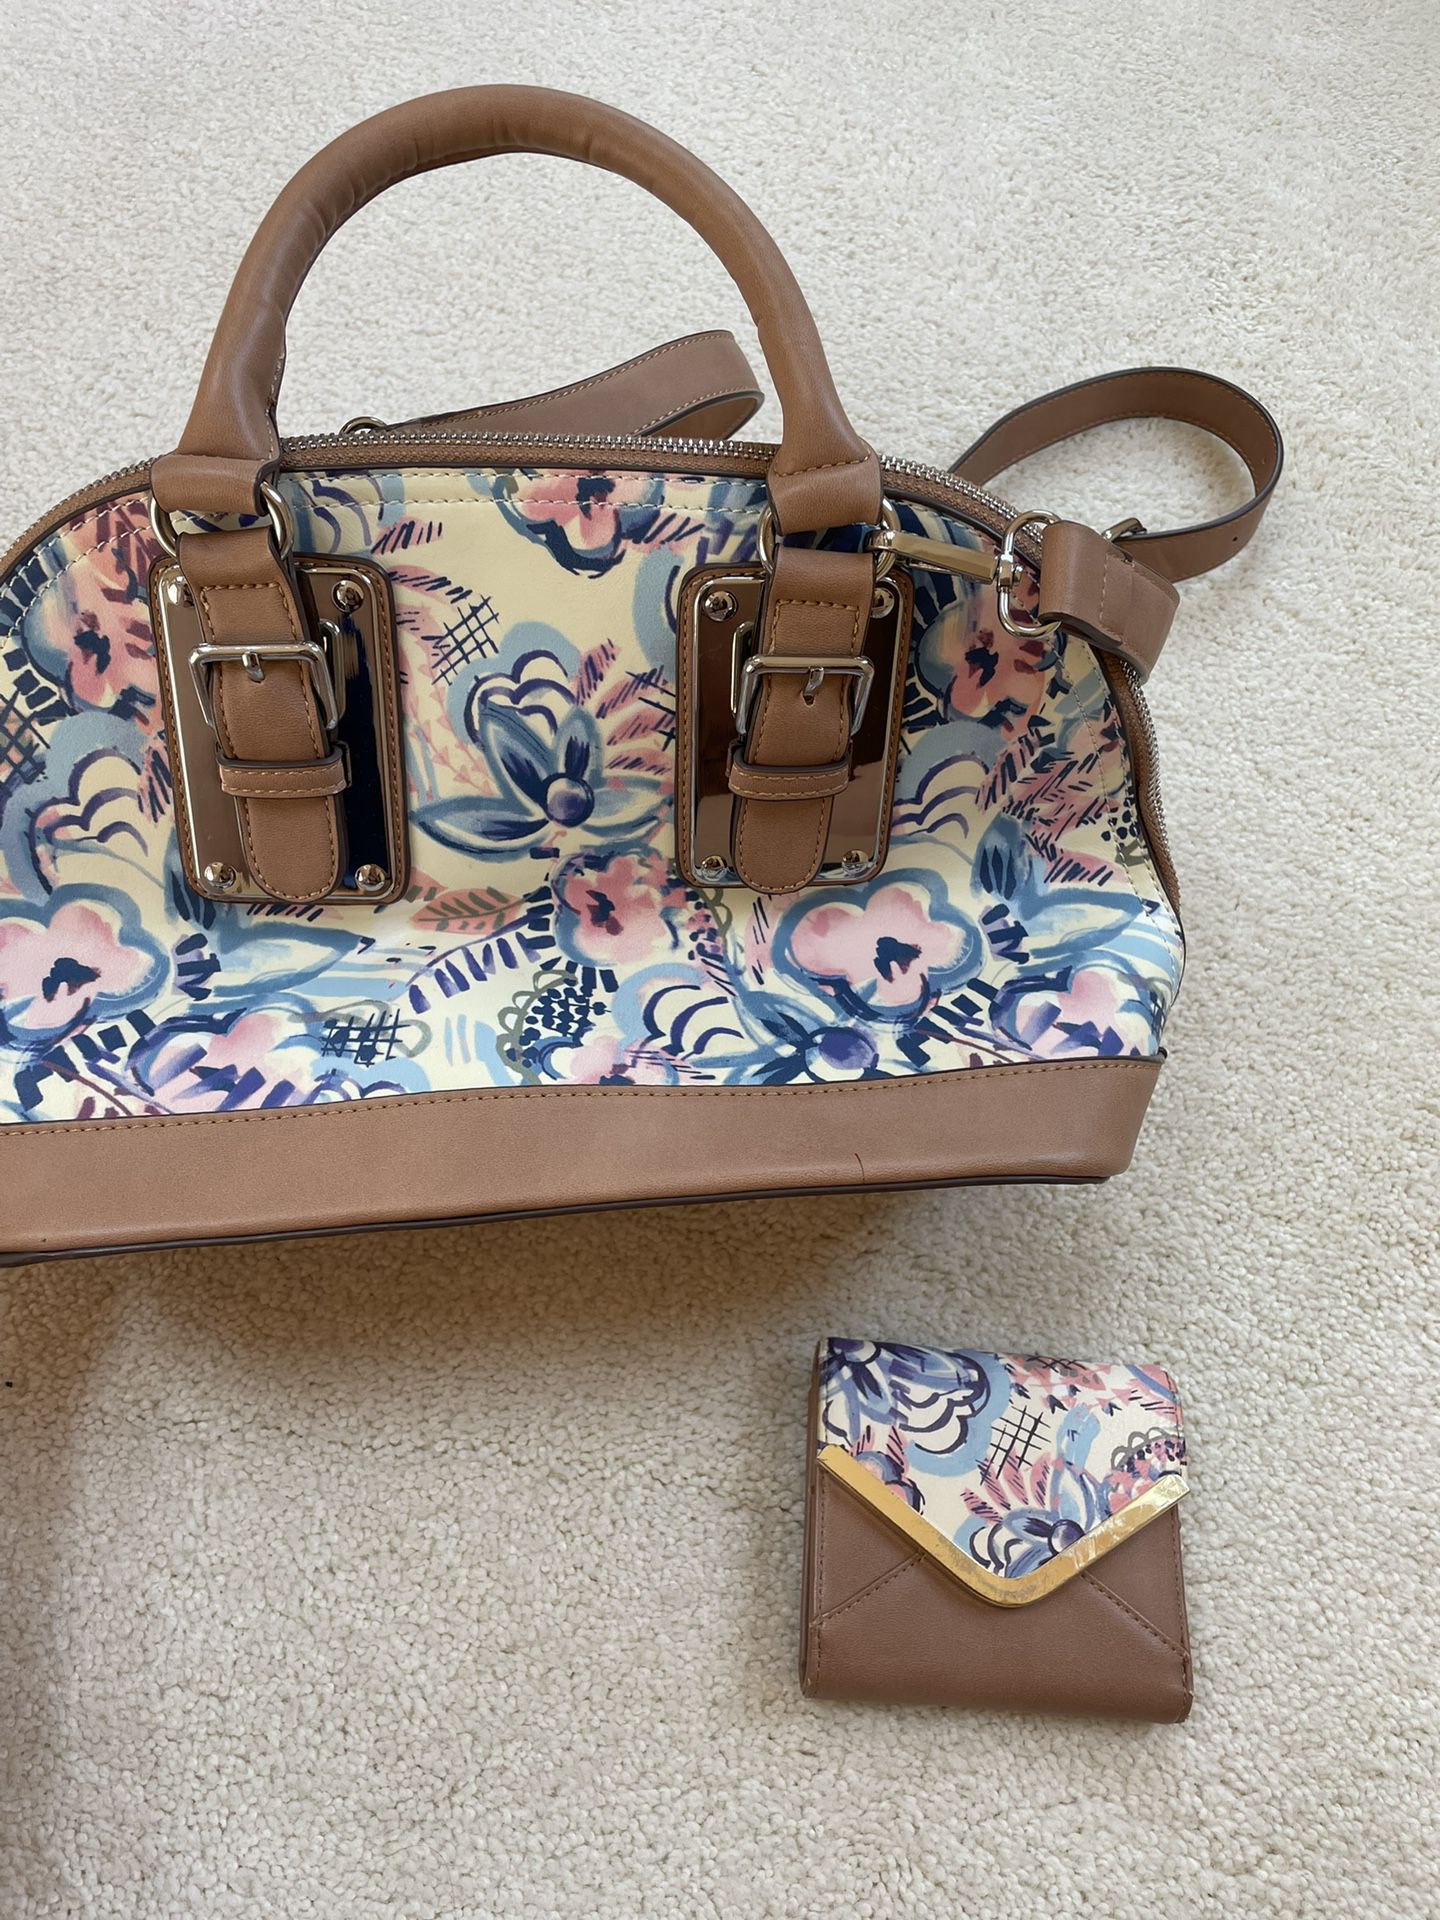 Purse And Wallet Charming Charlie Floral Satchel Crossbody Bag And Matching Wallet 